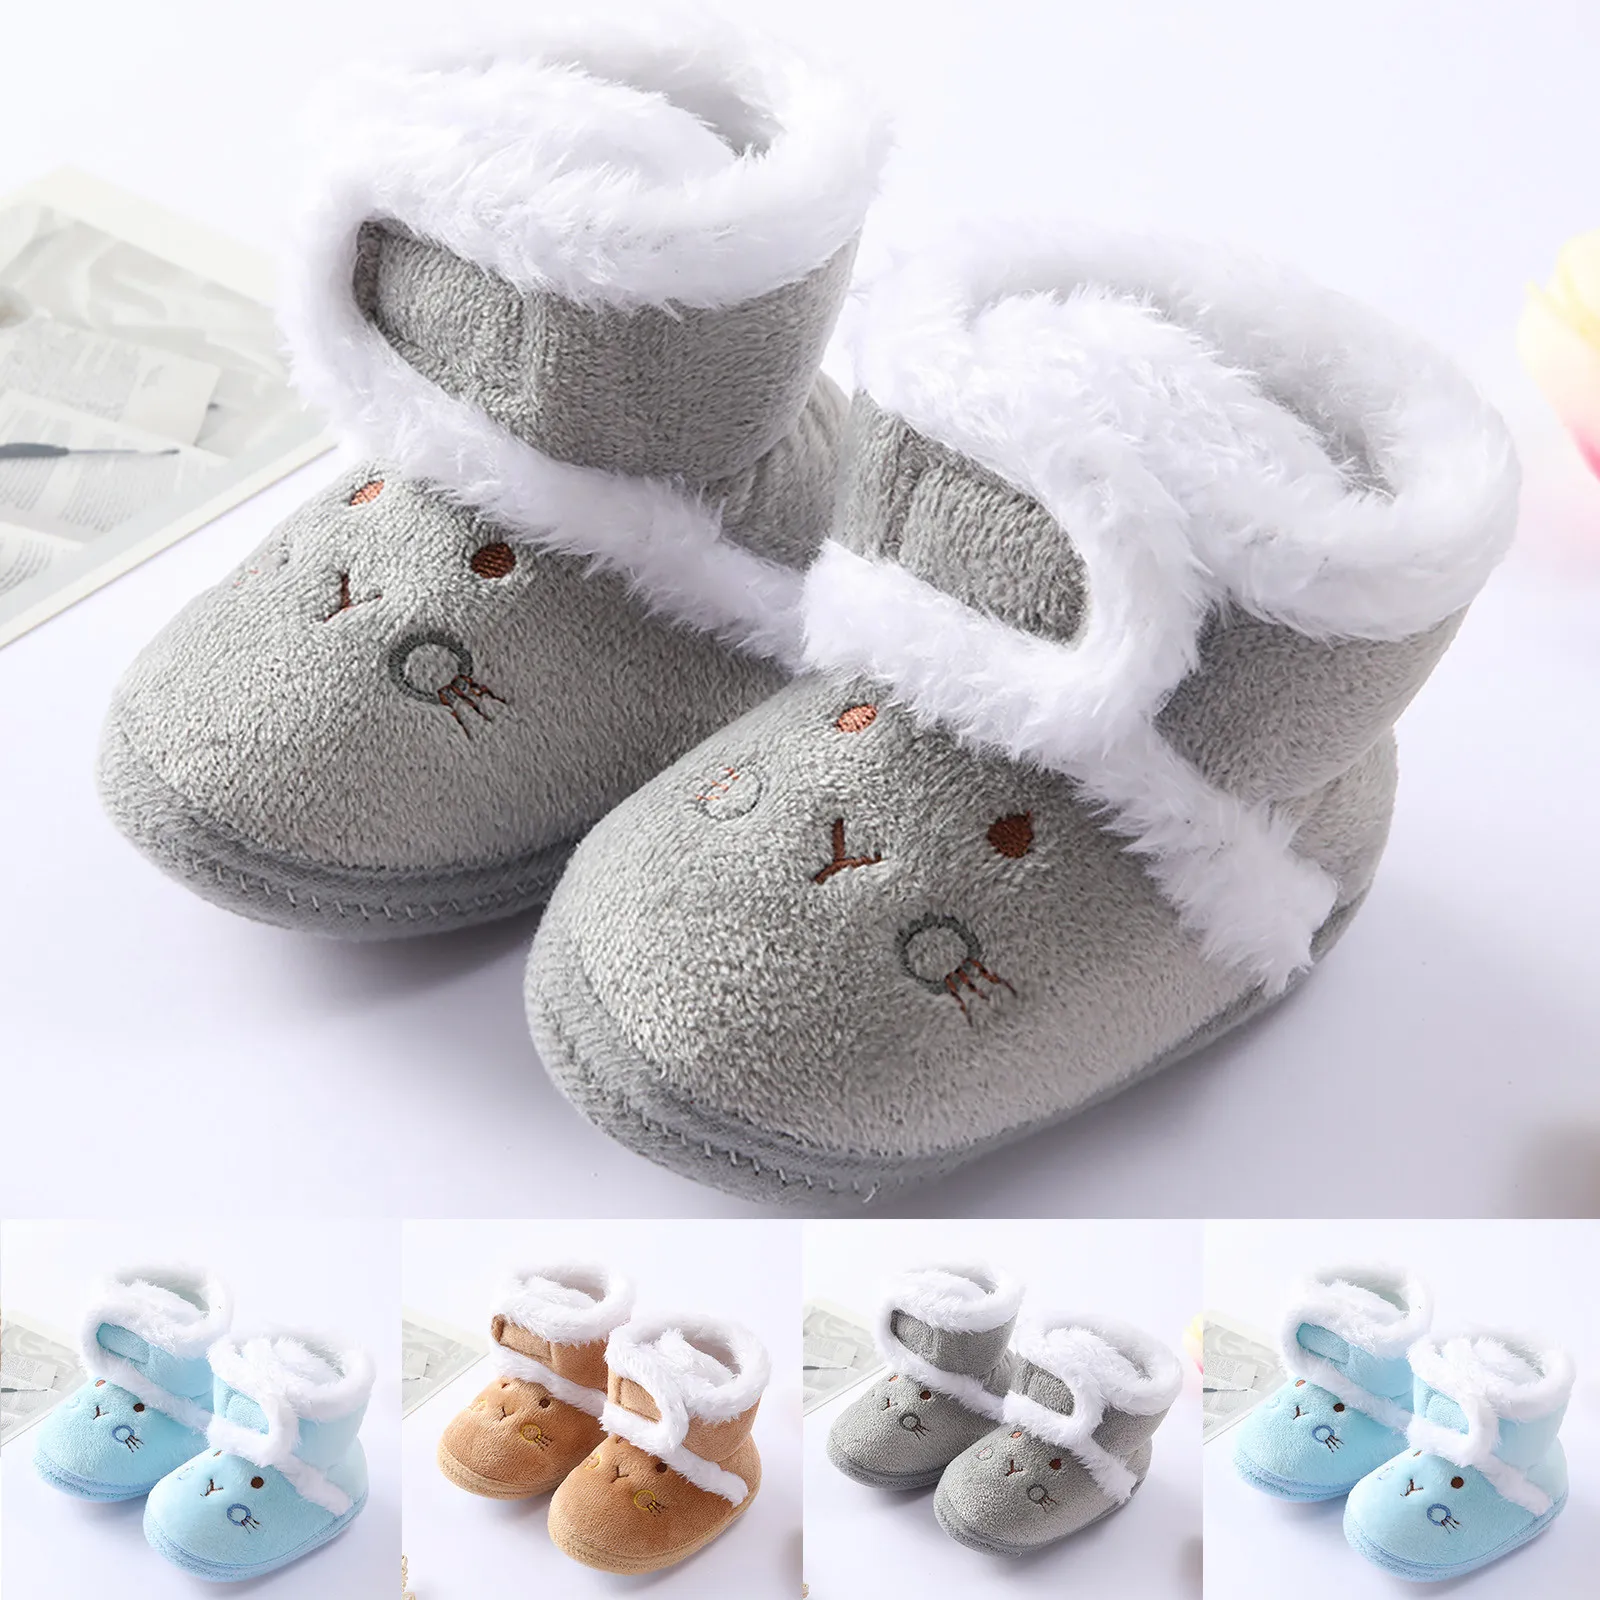 Kuner Toddler Baby Boys Girls Plush Robber Sole Warm Snow Boots First Walkers Shoes 